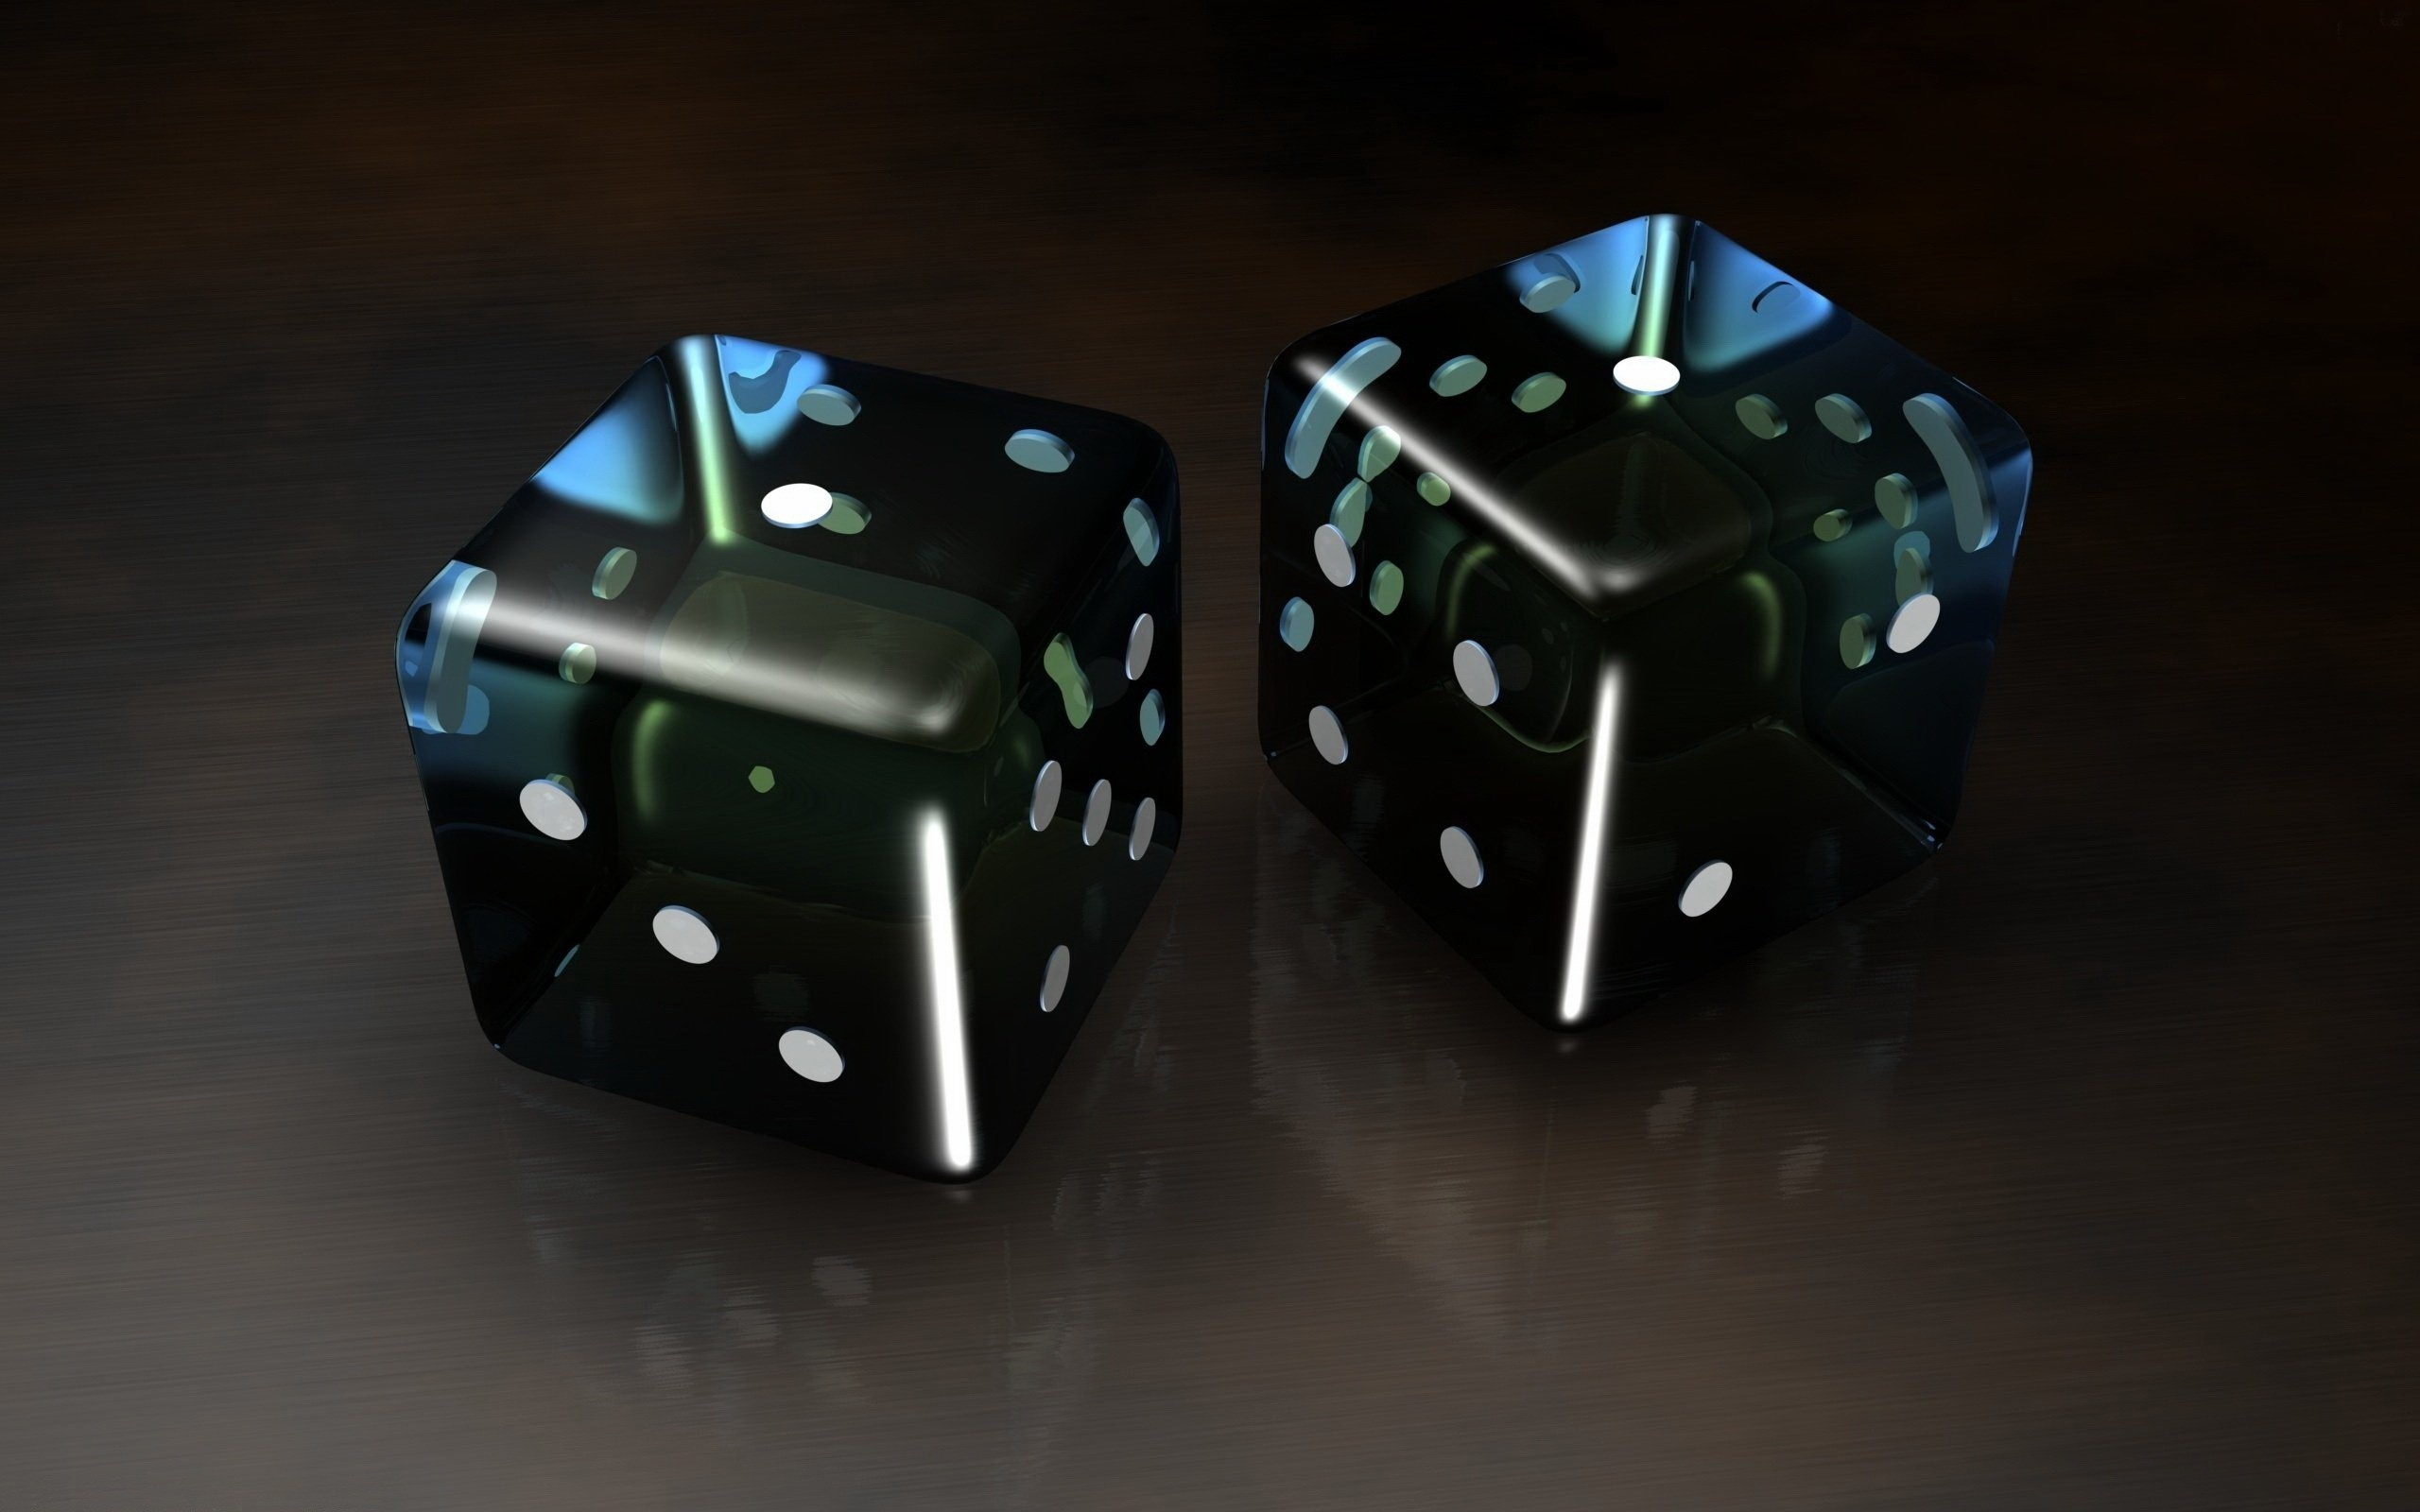 dice wallpaper,games,indoor games and sports,dice,green,dice game